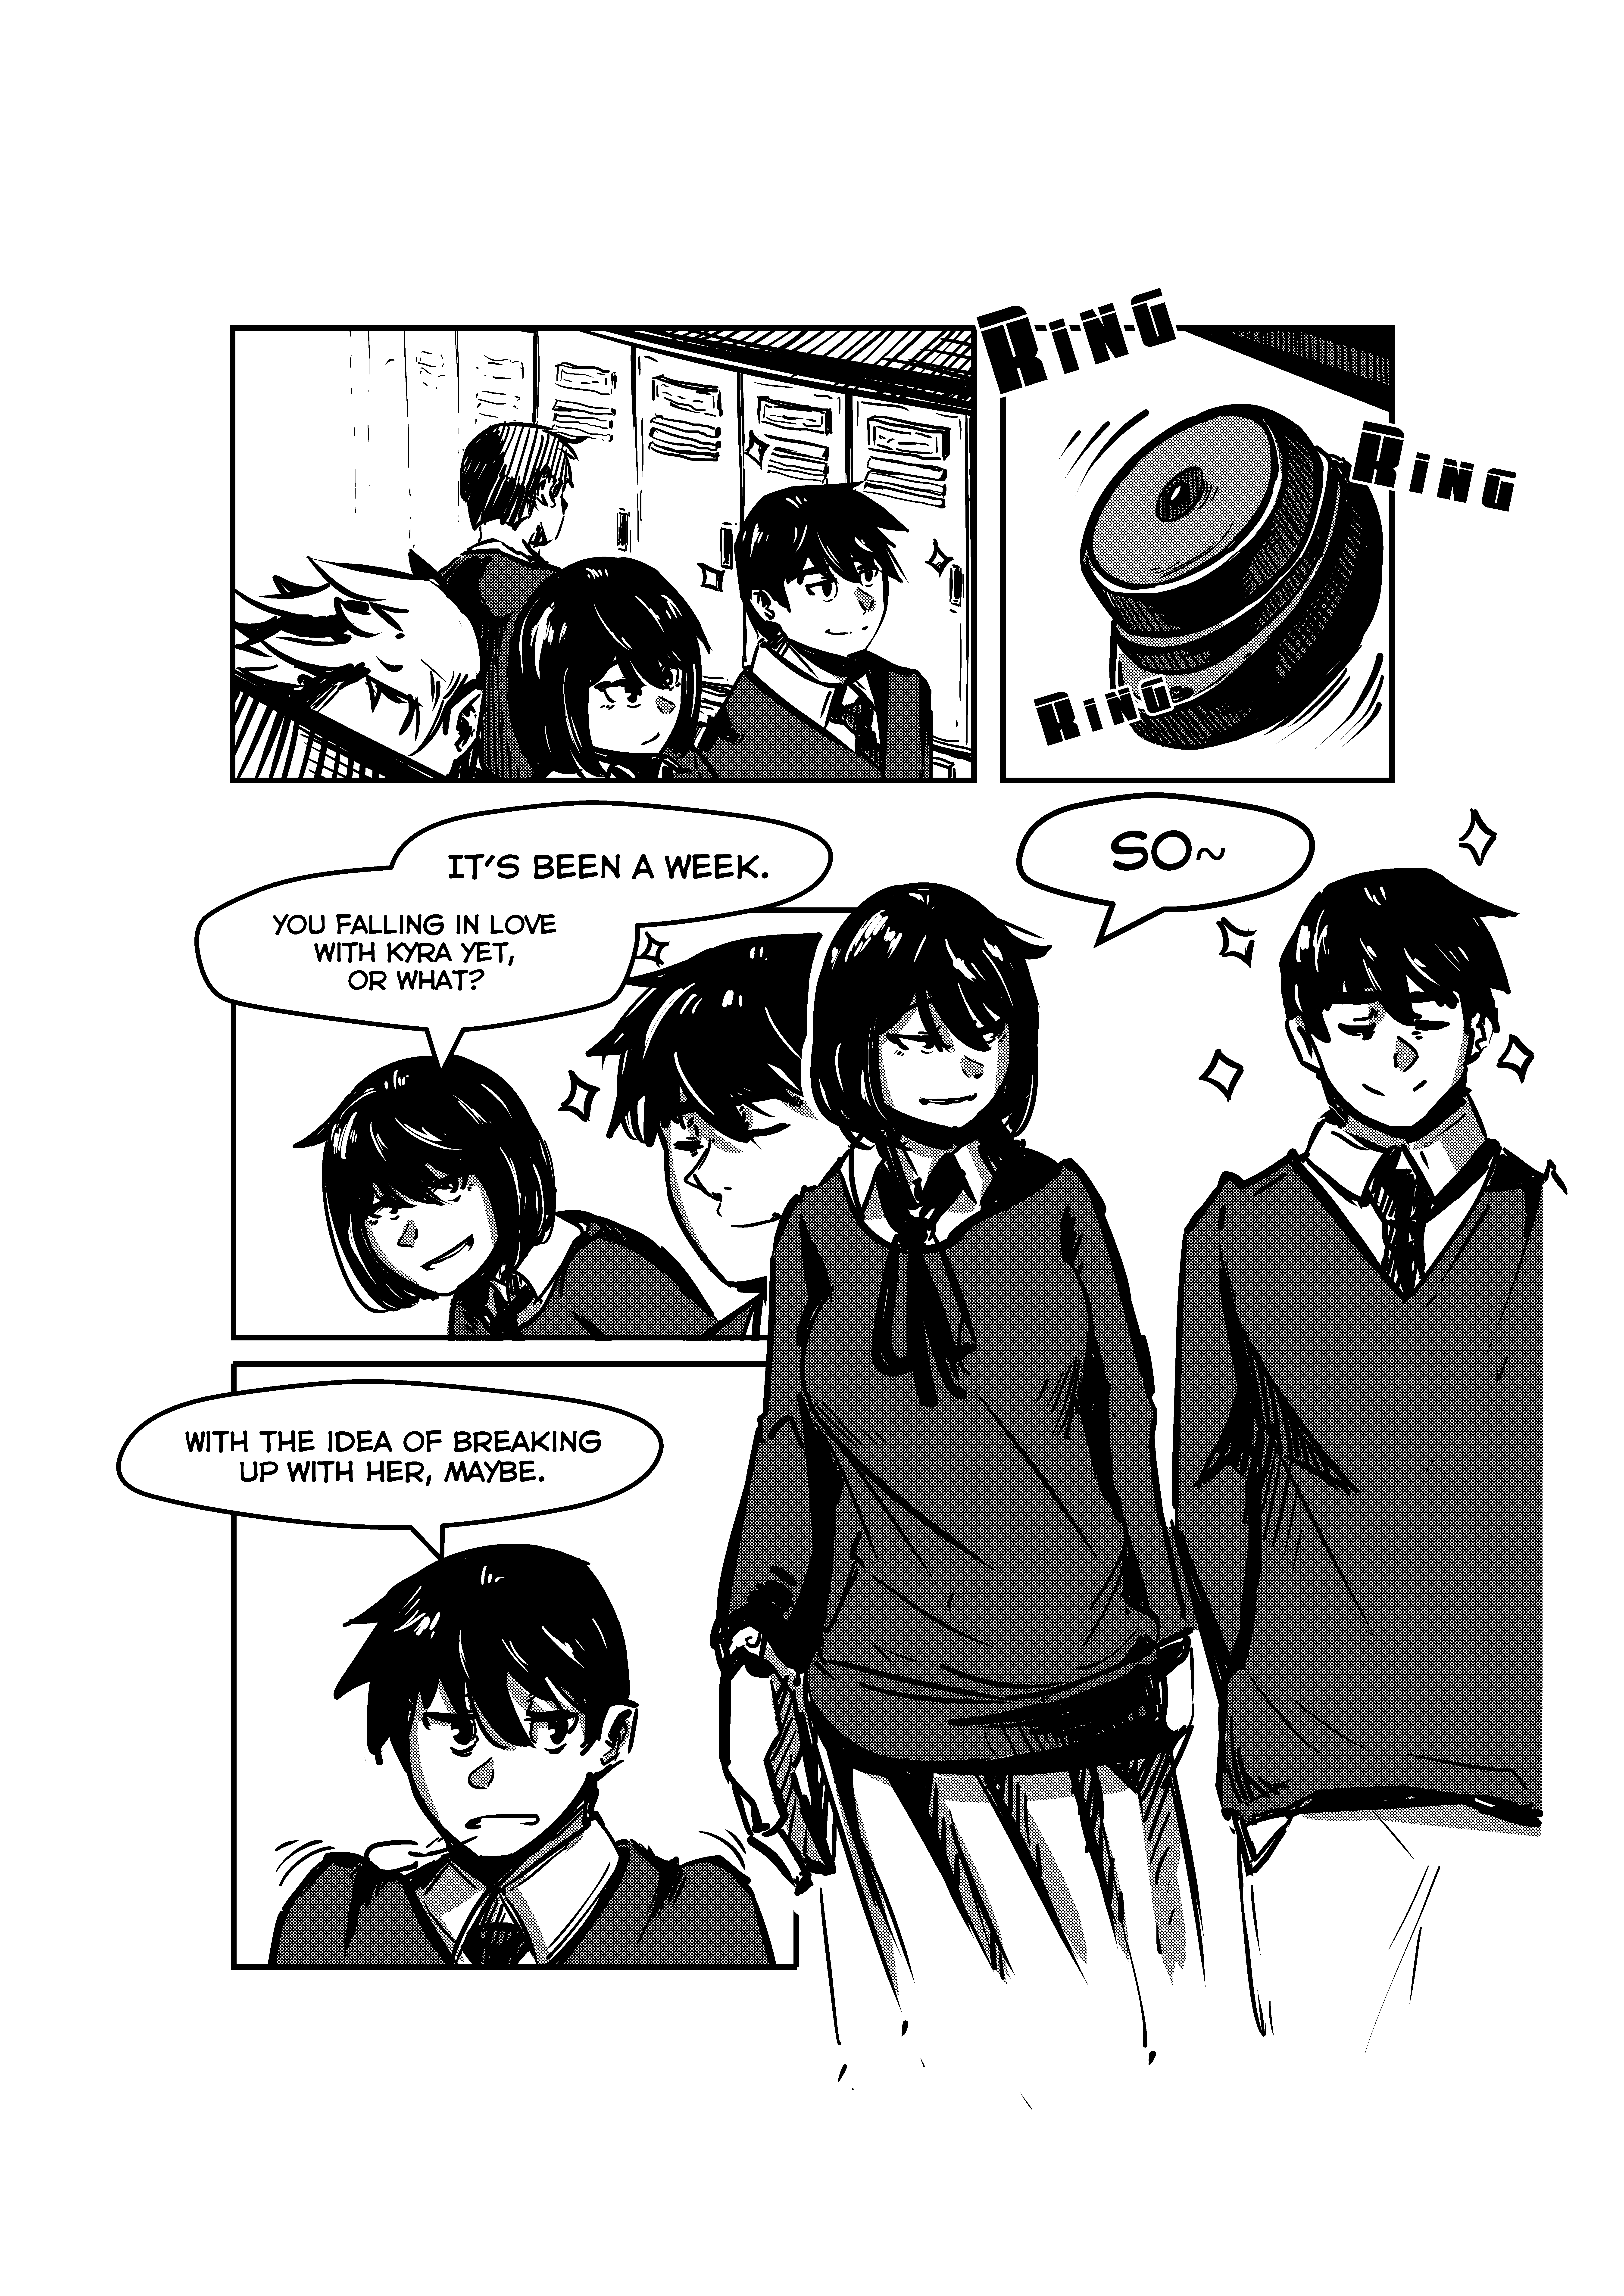 Opposites In Disguise - 11 page 9